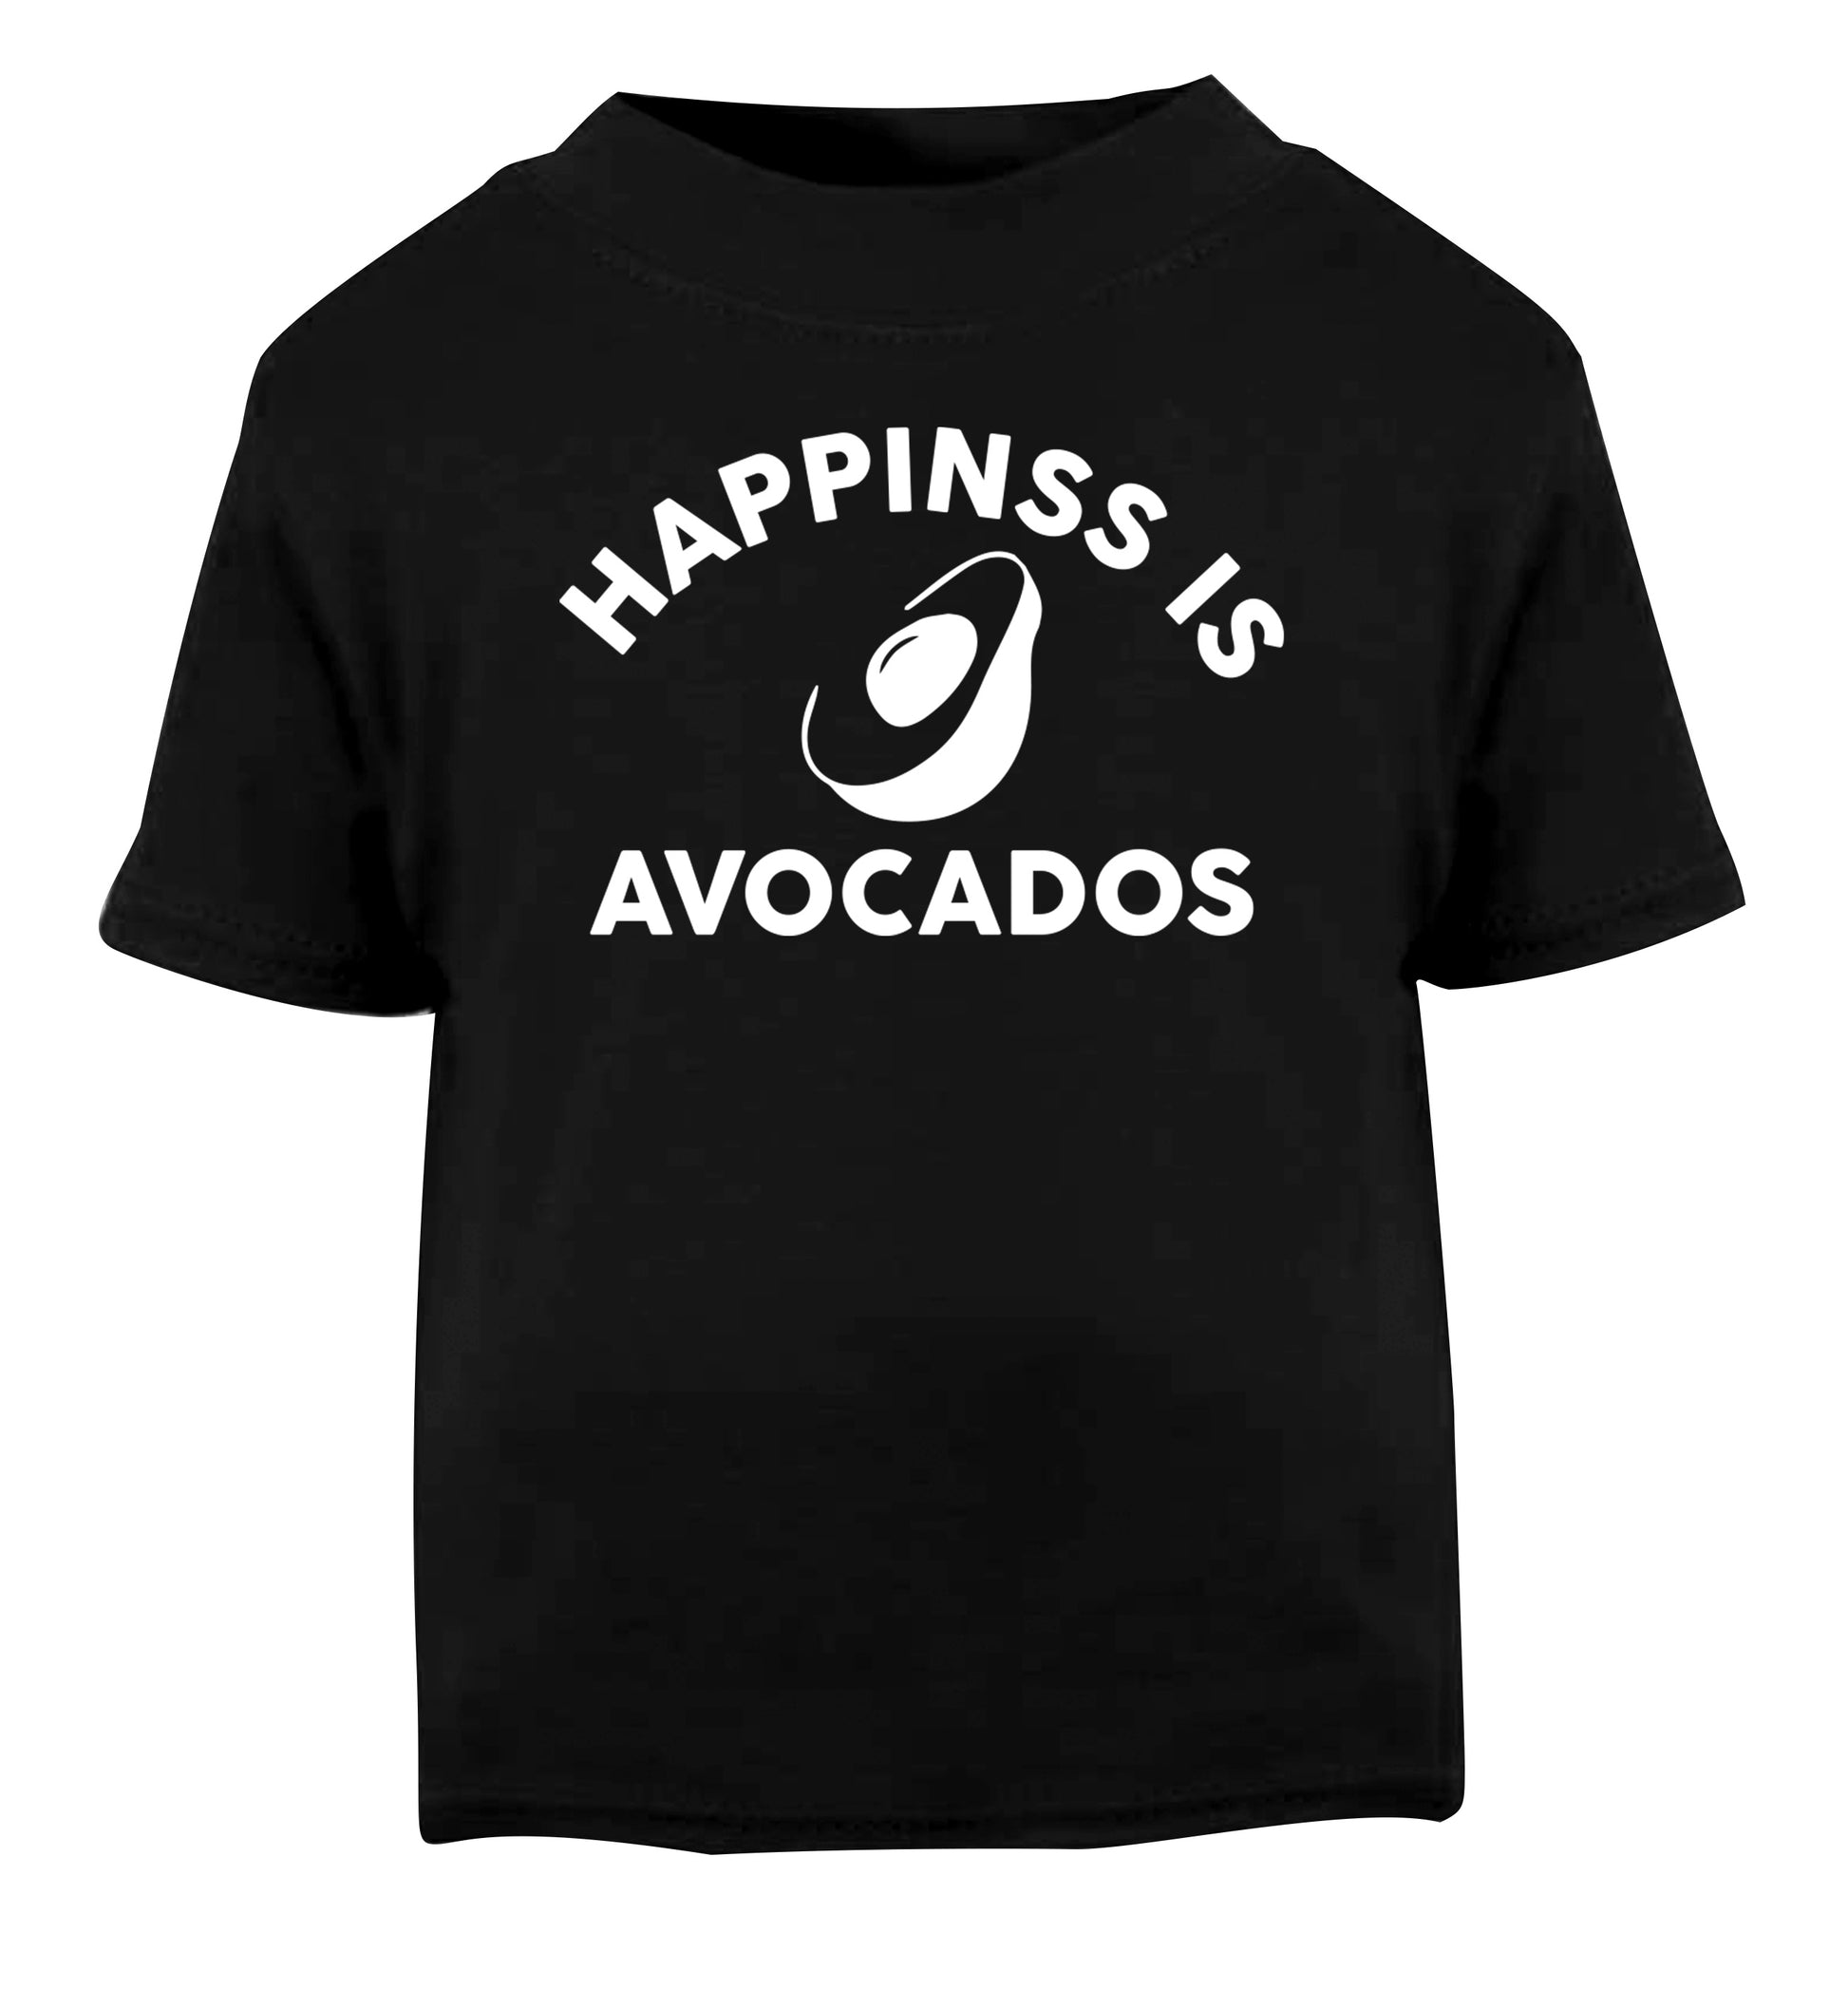 Happiness is avocados Black Baby Toddler Tshirt 2 years